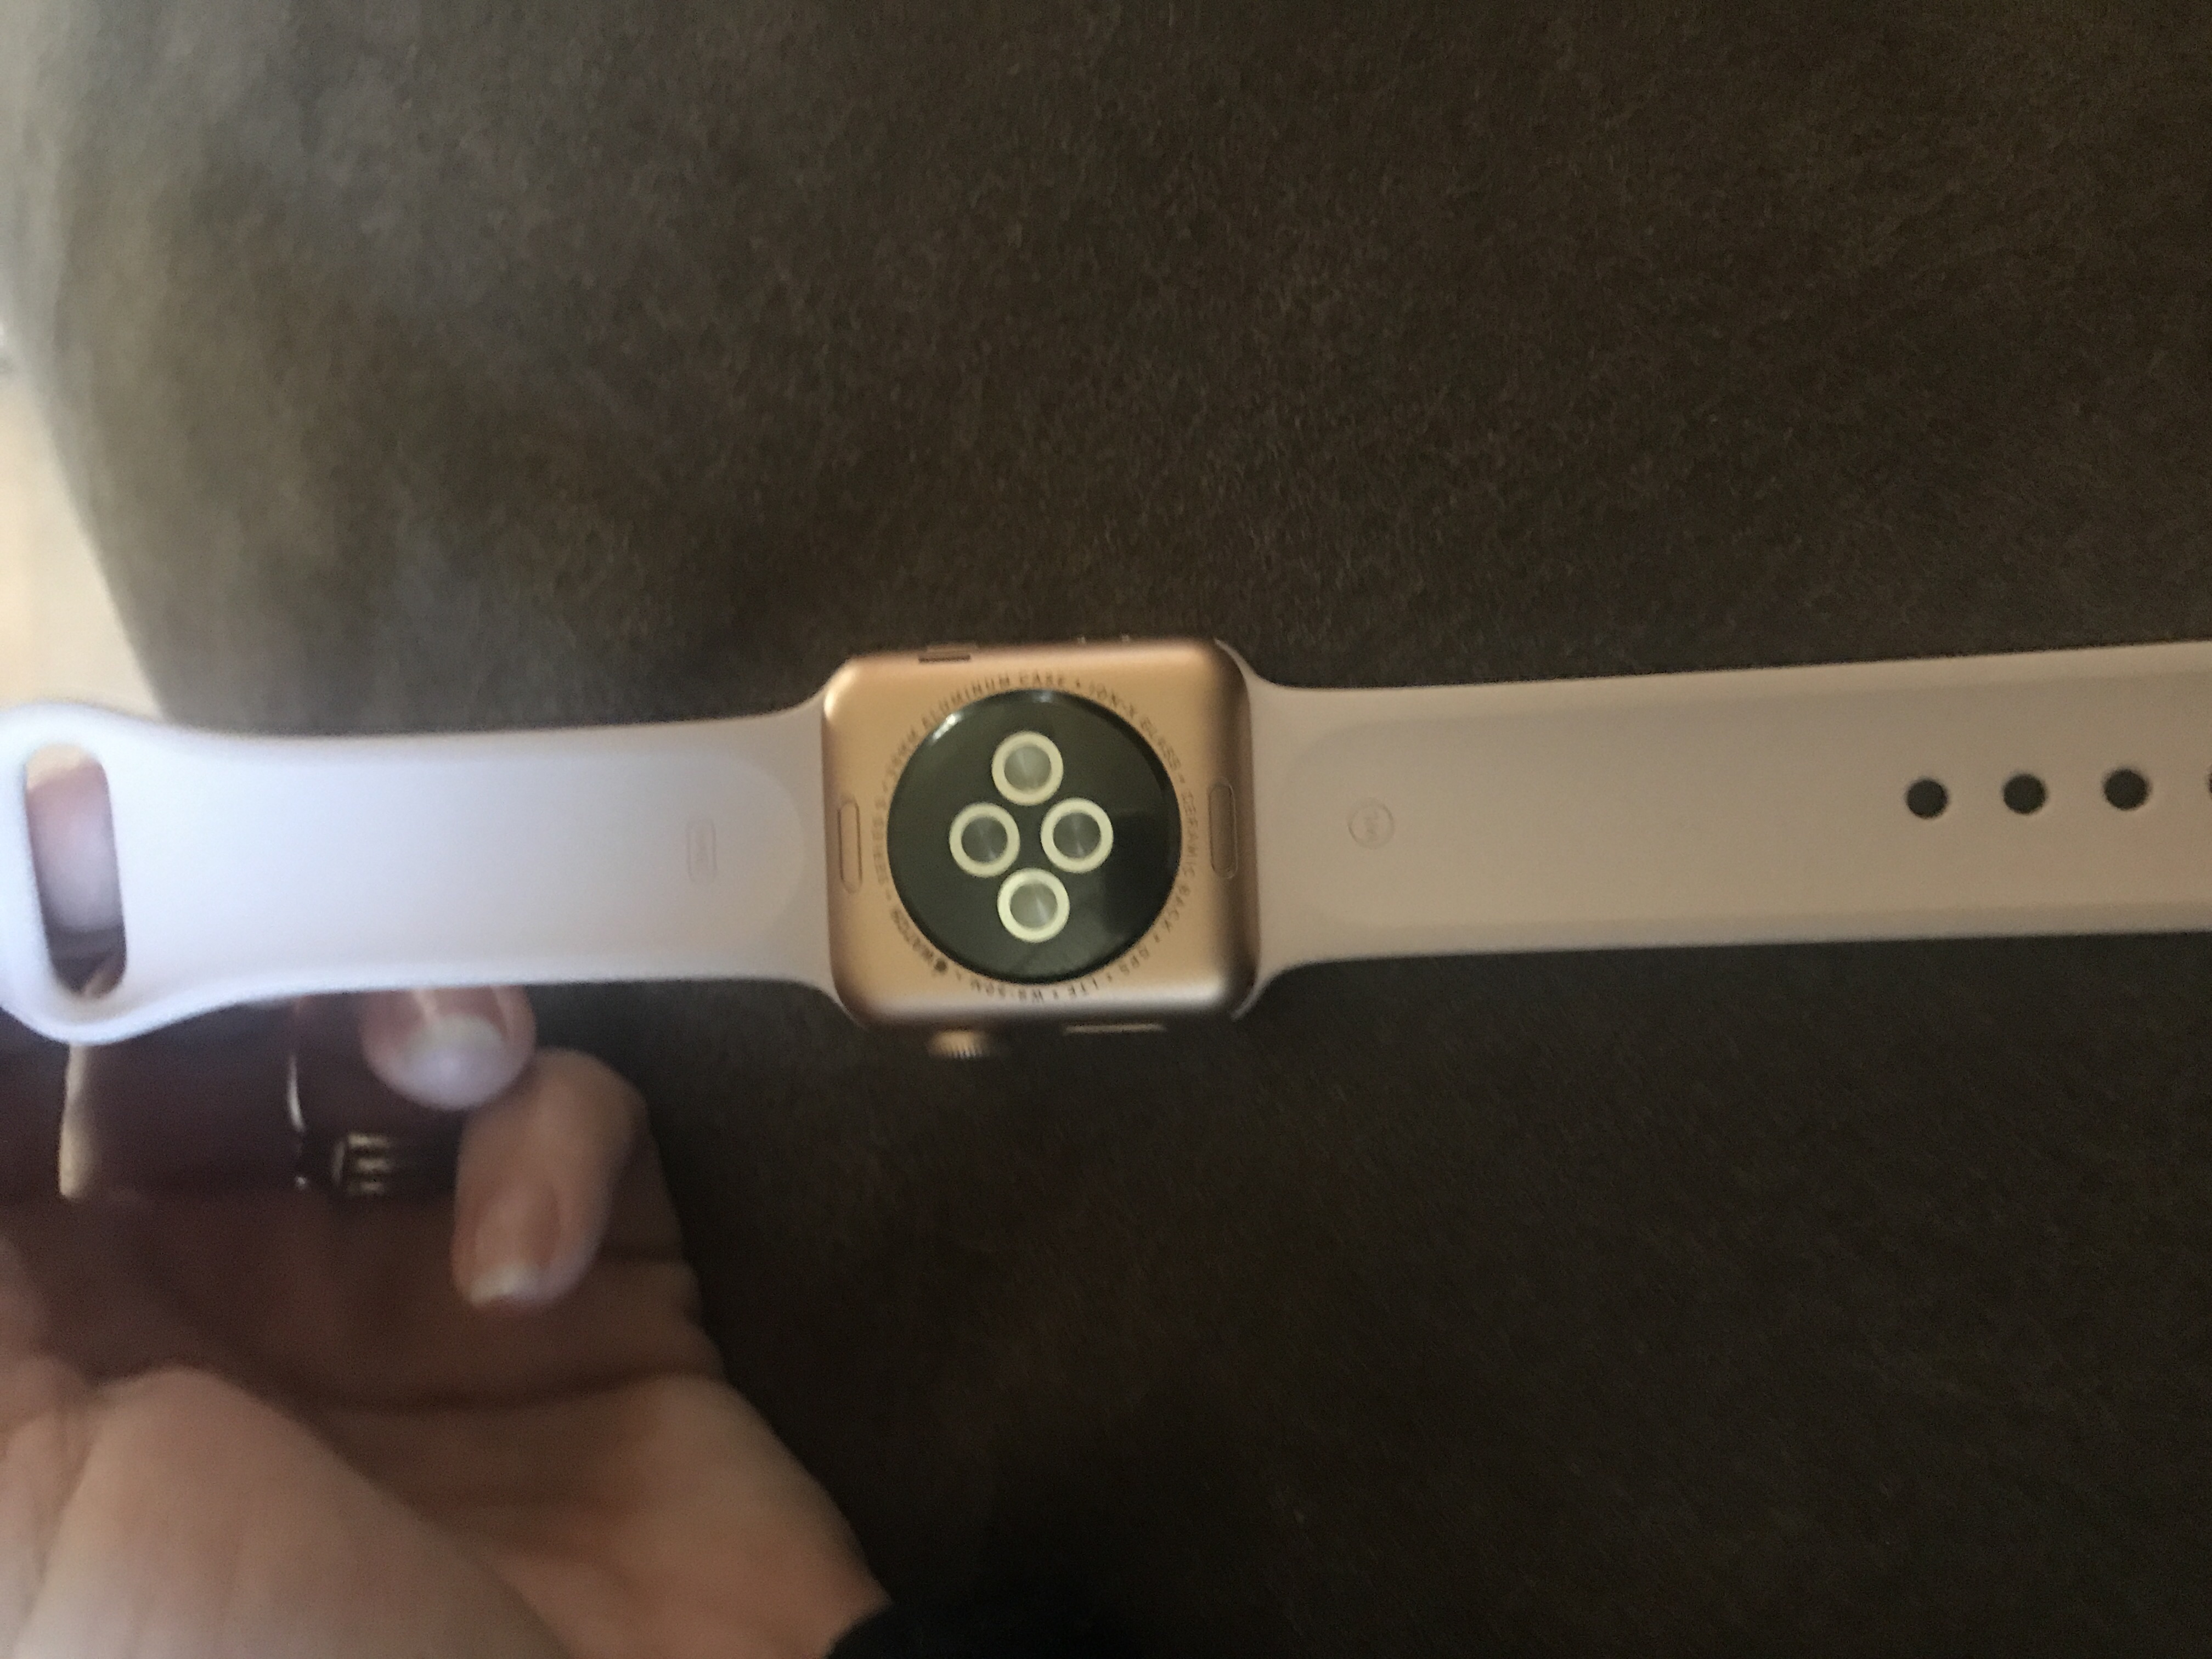 Apple Watch 3...Why is my wrist hurting? - Apple Community